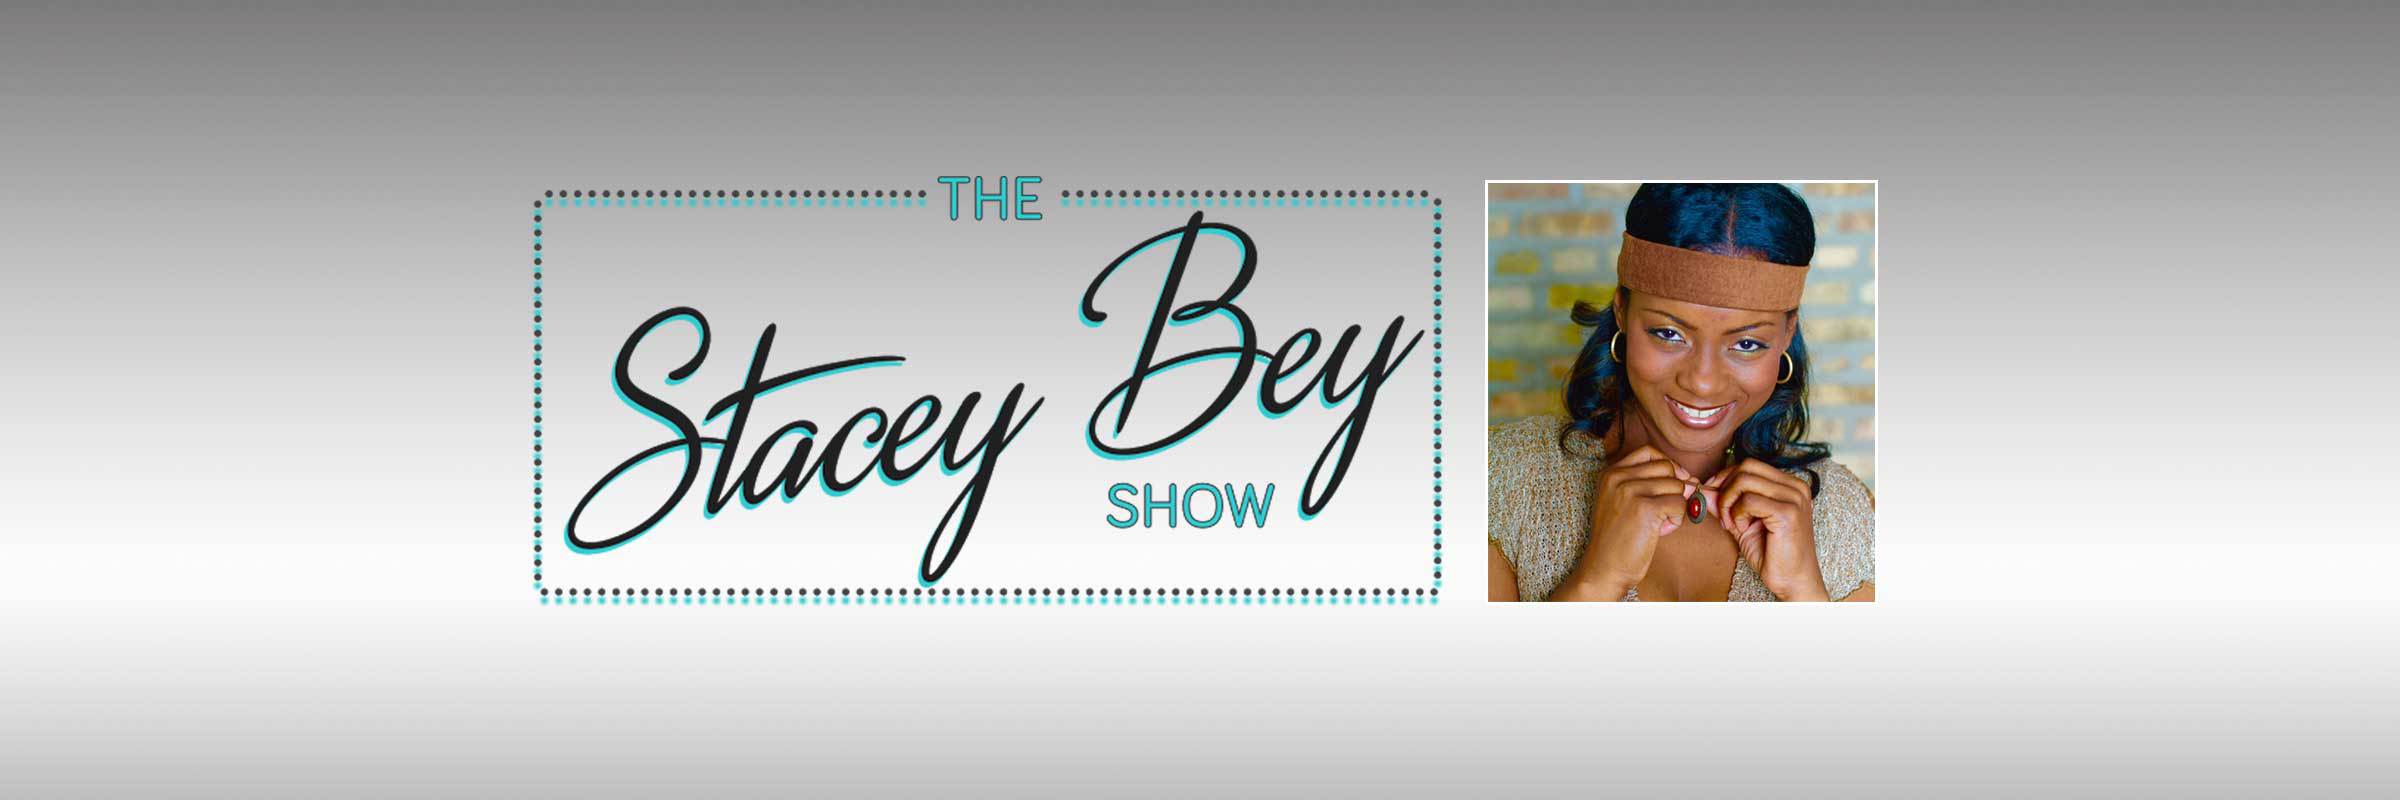 The Stacey Bey Show